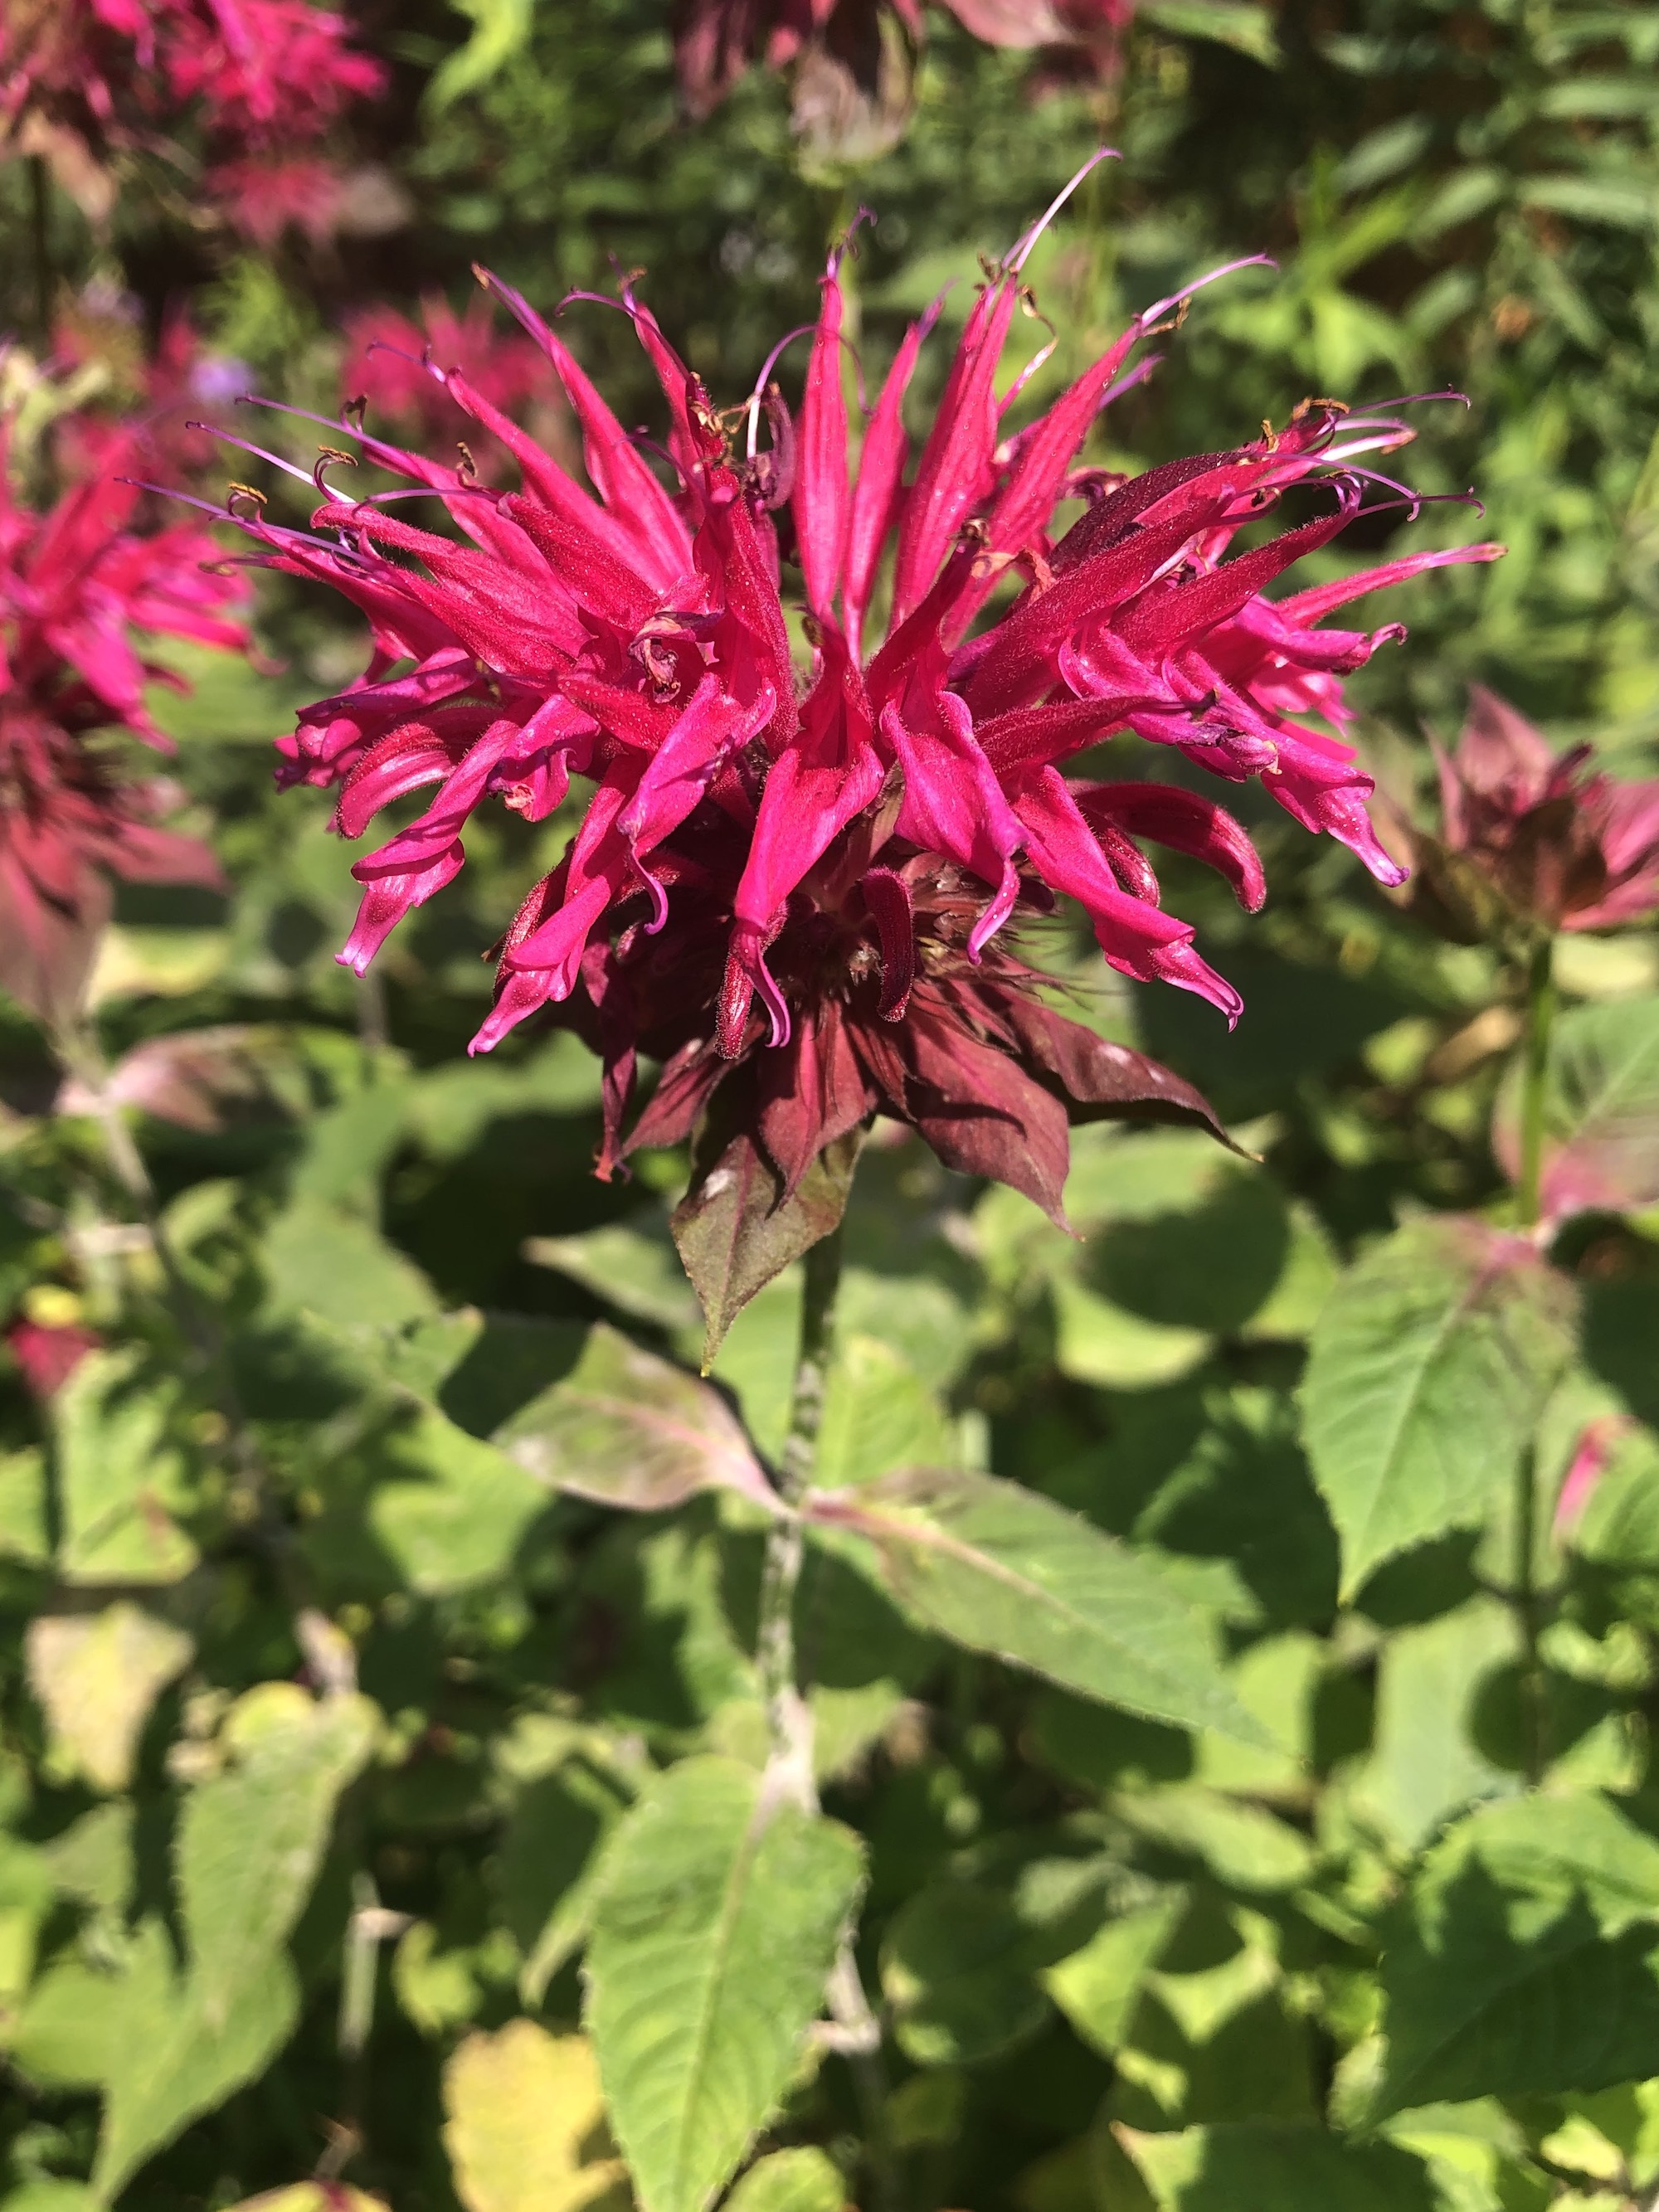 Beebalm along bike path behind Gregory Street in Madison, Wisconsin on July 16, 2021.